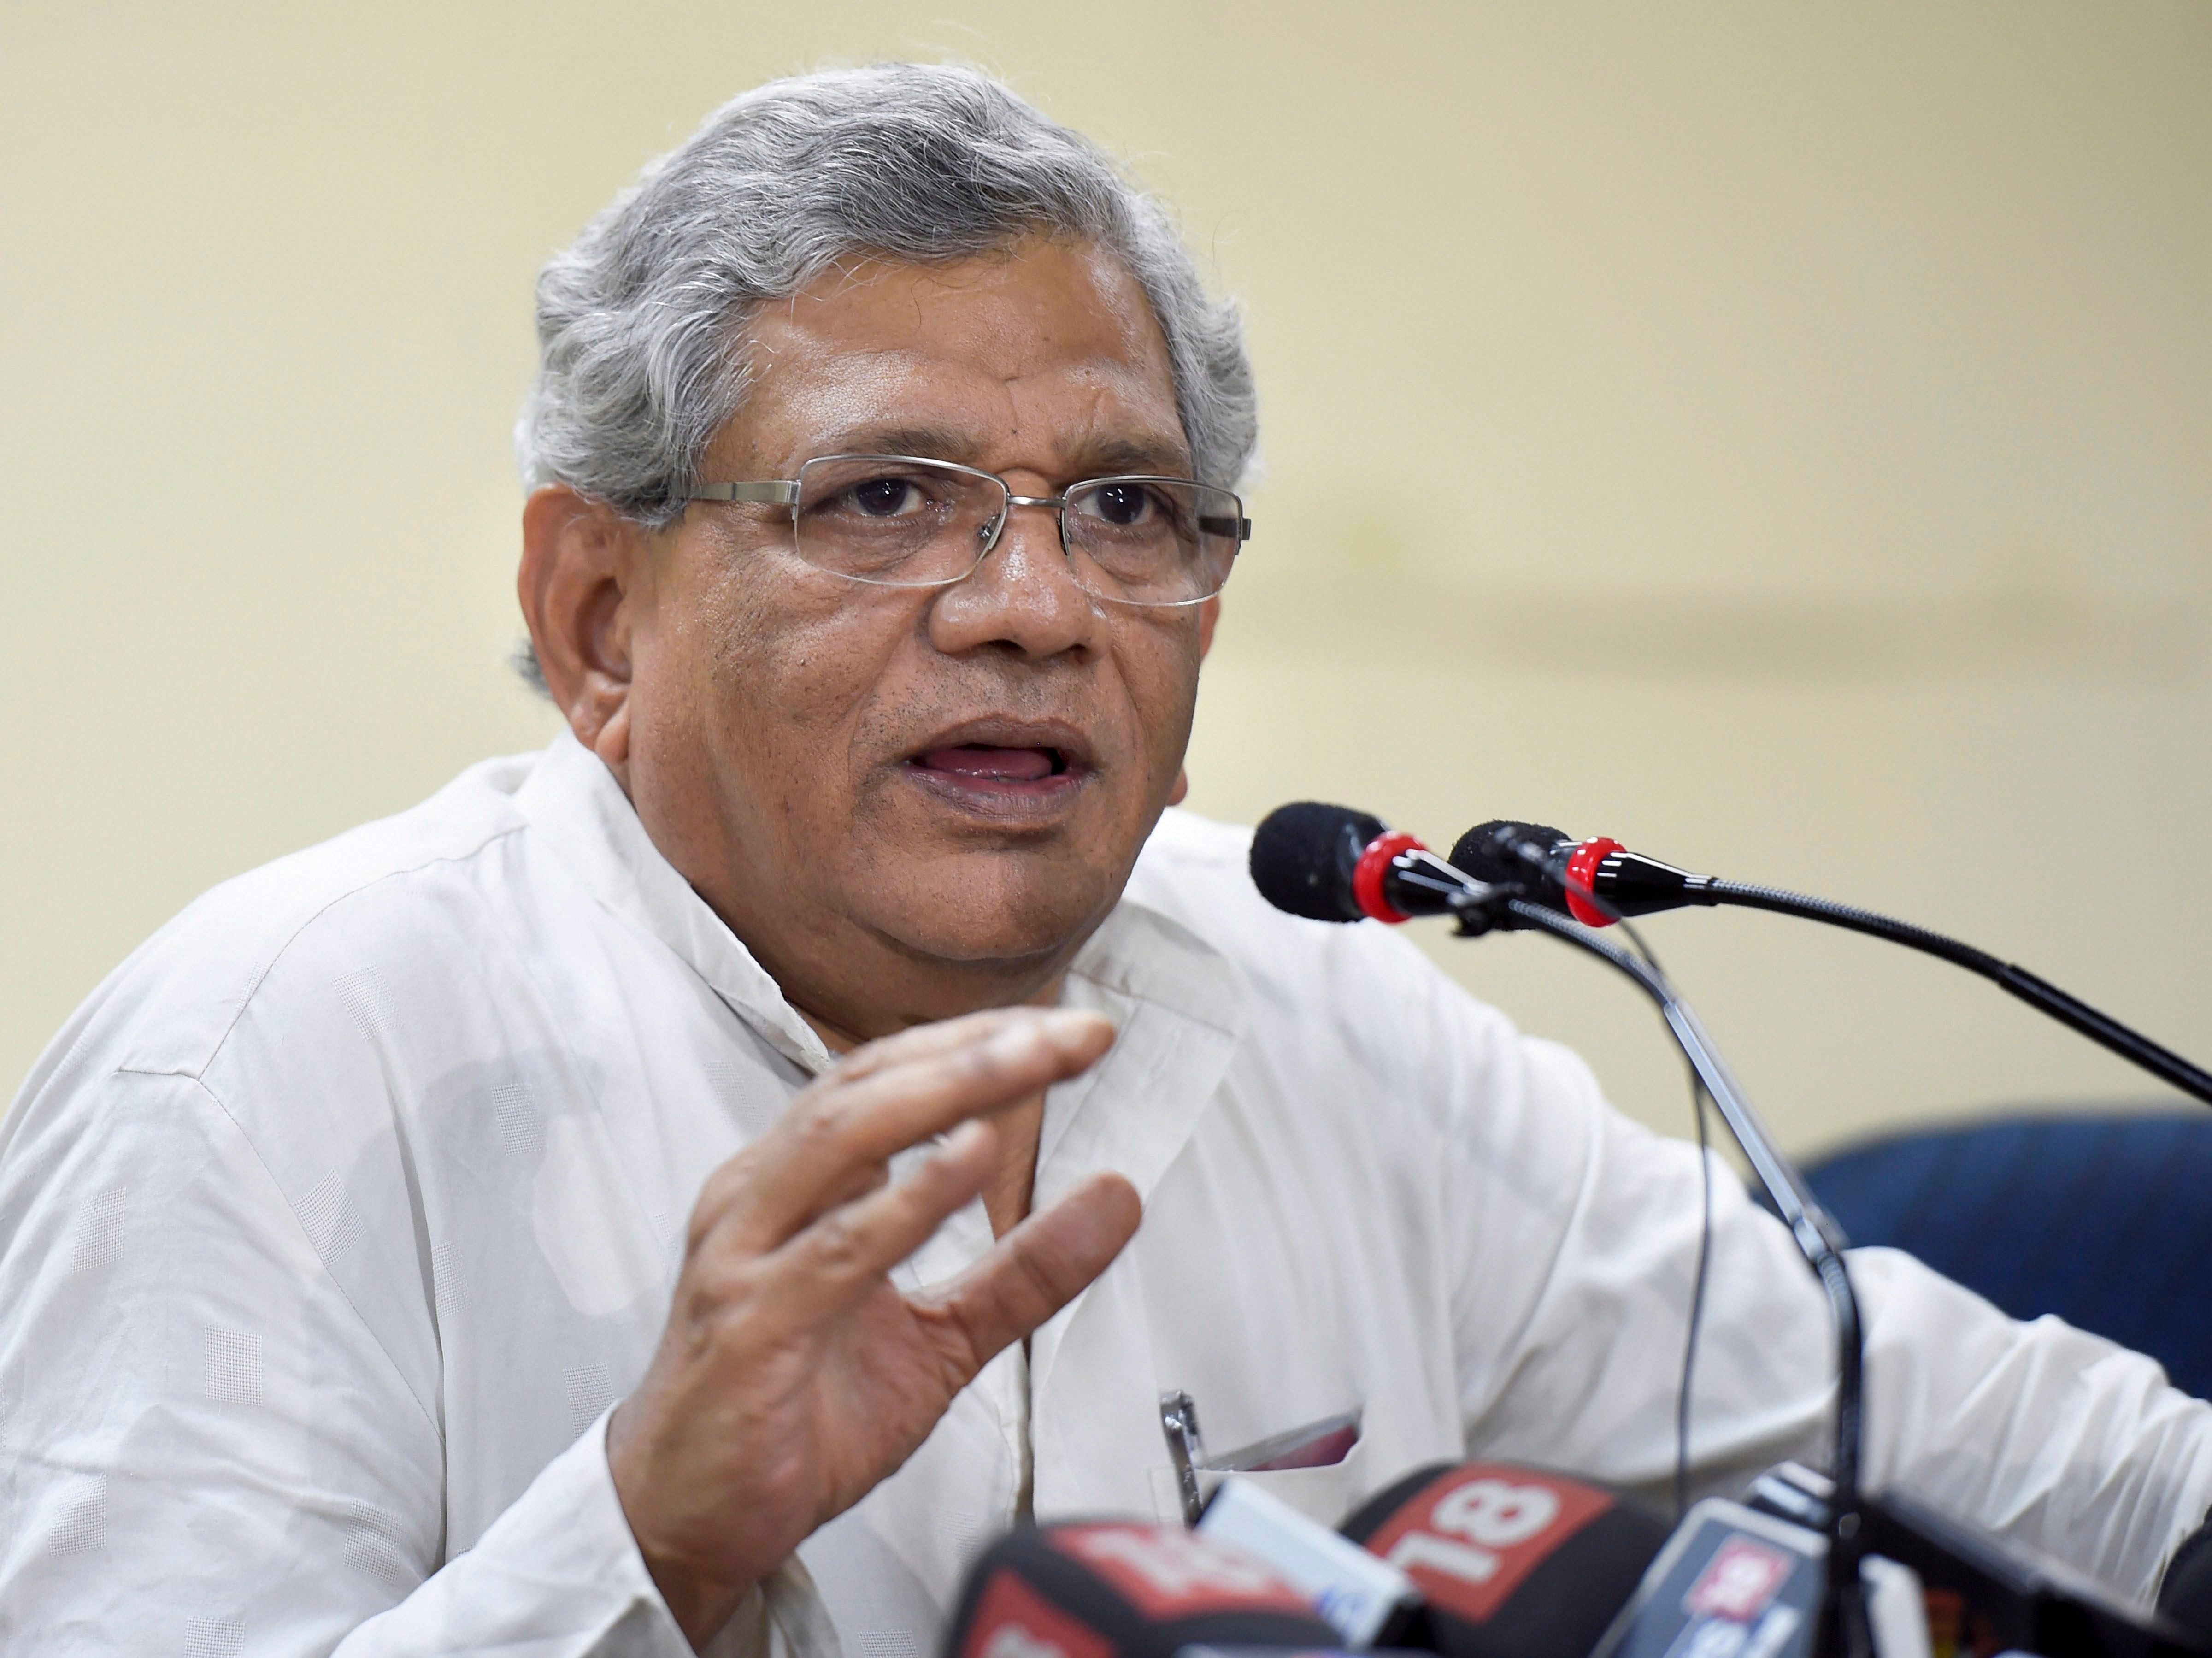 Releasing four booklets on 'Four Years of Modi Govt Misrule: Why it has to End?', CPM general secretary Sitaram Yechury said under the NDA rule, people who have looted the country have "happily fled" when poor farmers have not got any relief. PTI file photo